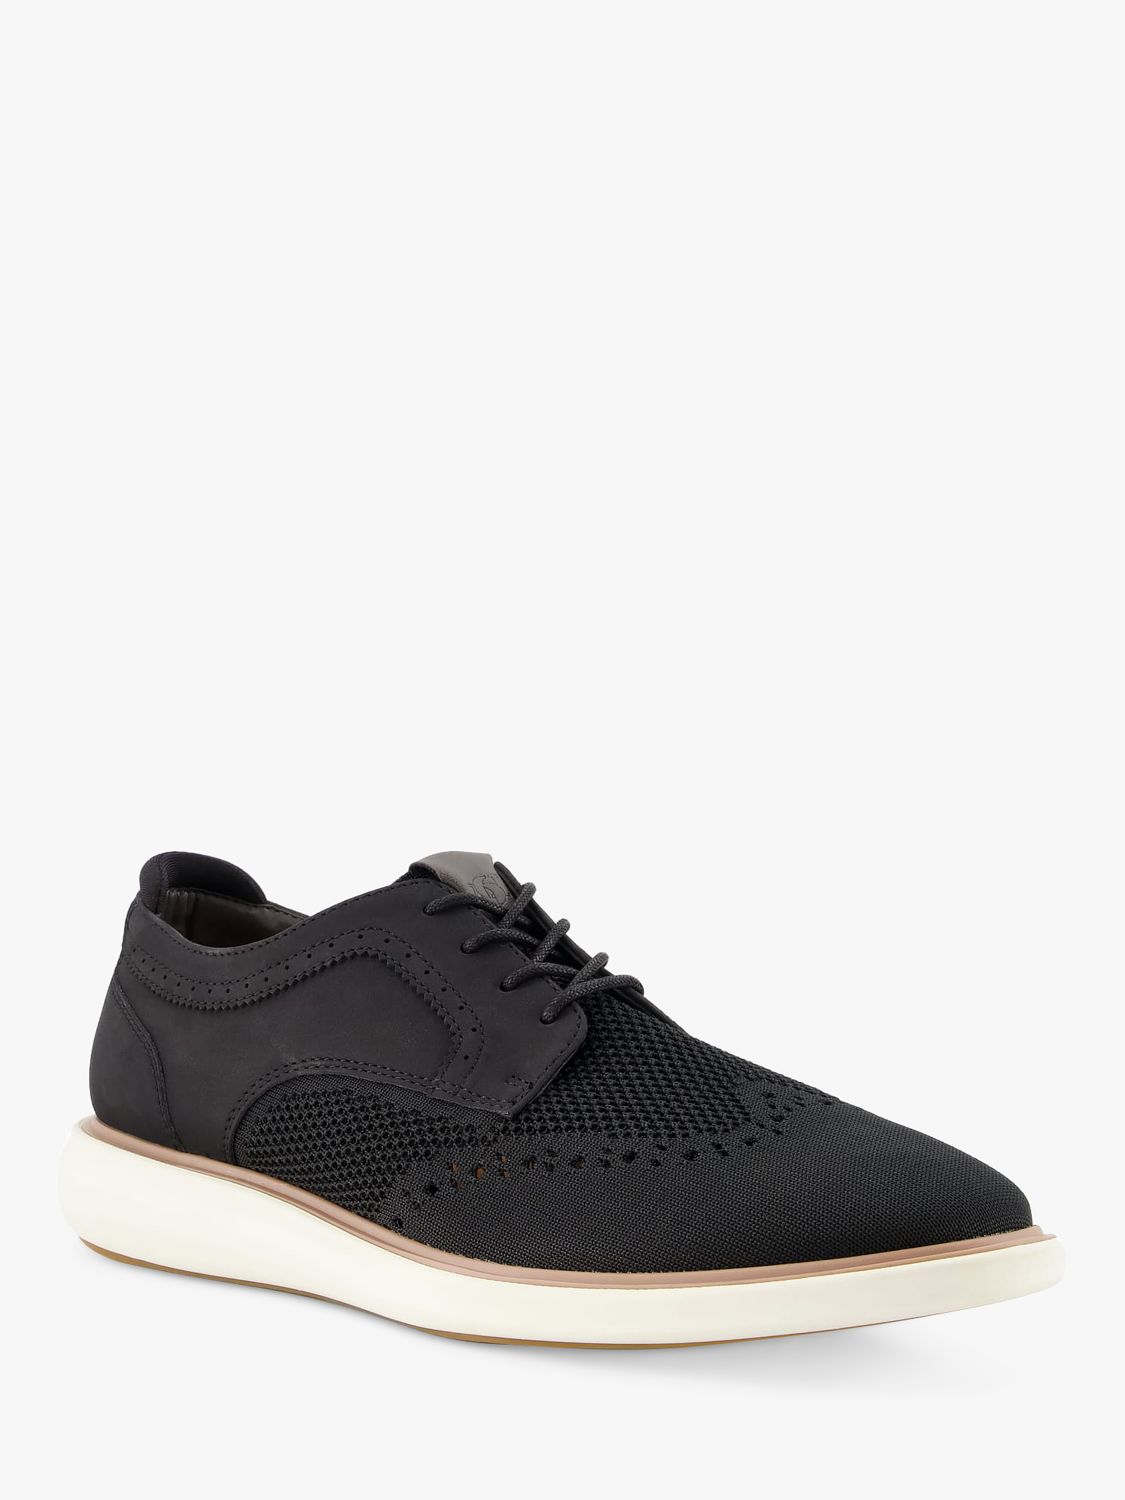 Dune Barleigh Wedge Sole Knitted Brogues, Black at John Lewis & Partners